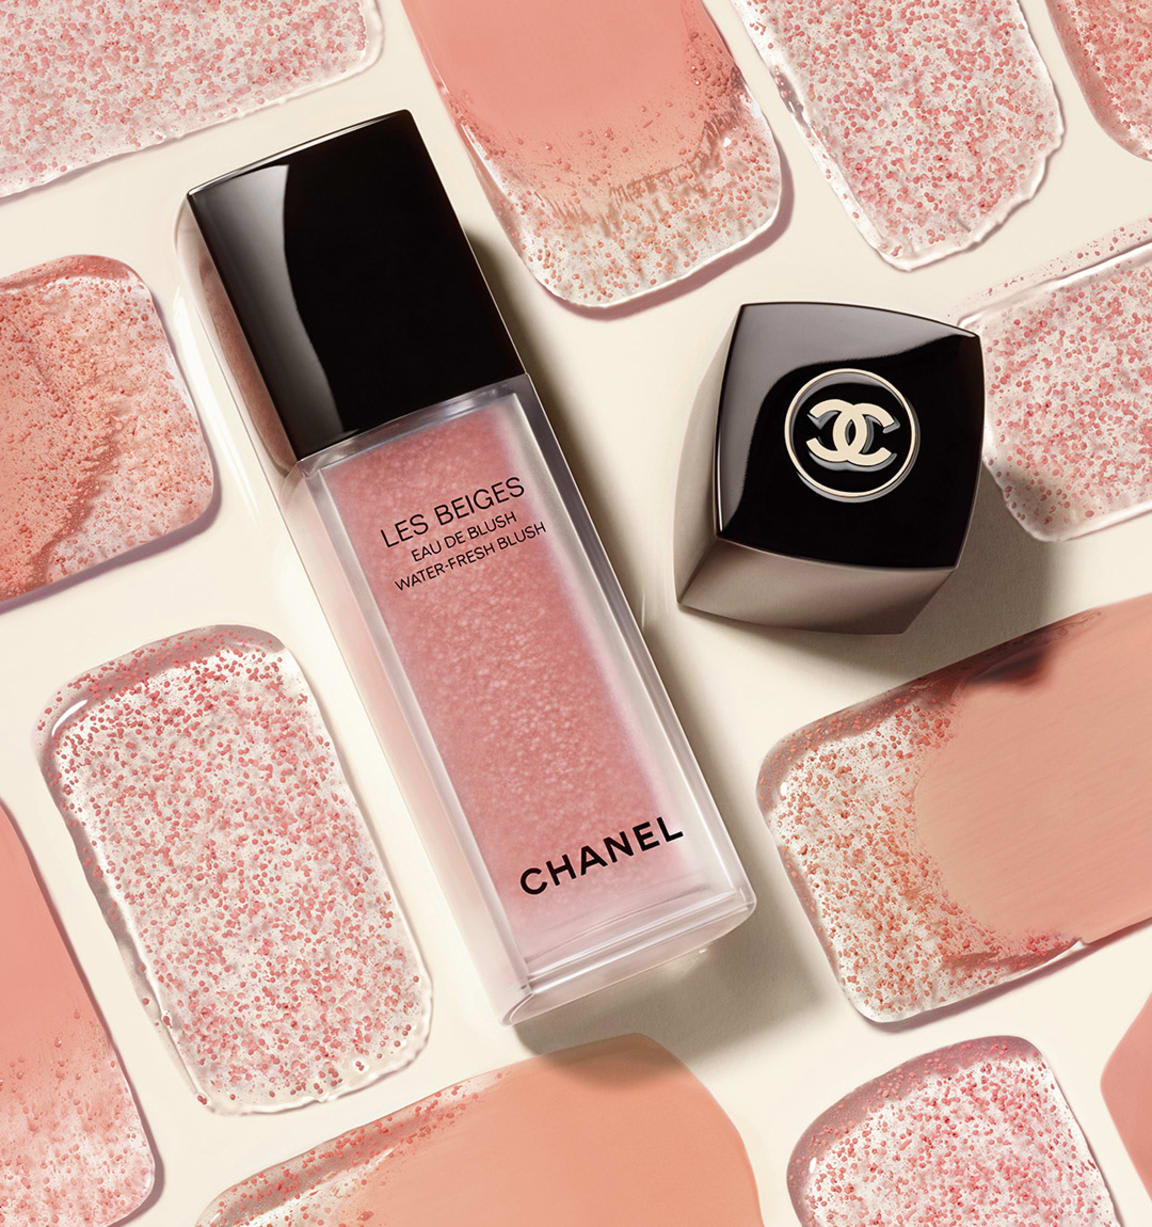 NEW CHANEL LES BEIGES WATER-FRESH BLUSH, 3 Shades